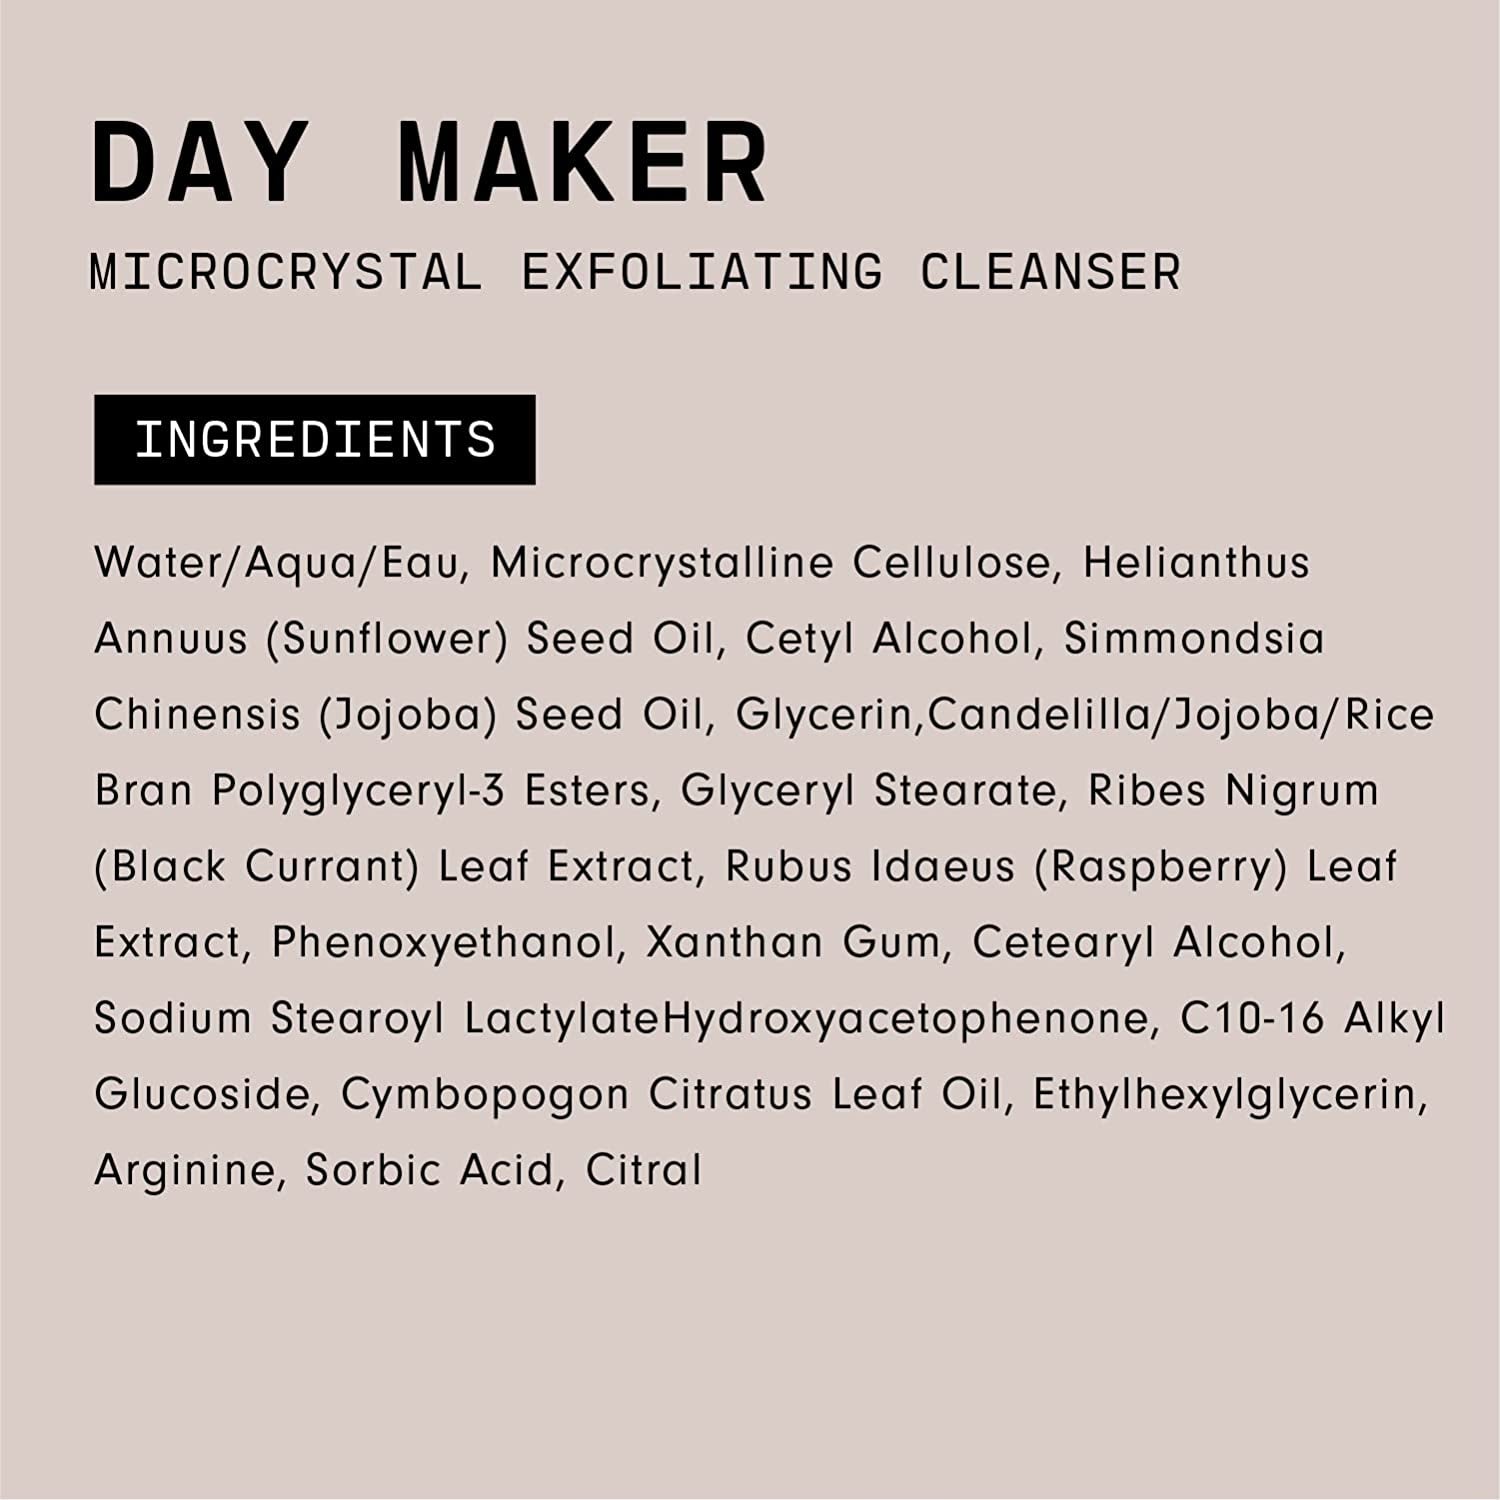 "Versed Day Maker Microcrystal Exfoliating Cleanser - Vegan Creamy Facial Wash for Clear, Glowing Skin (3 Fl Oz)"